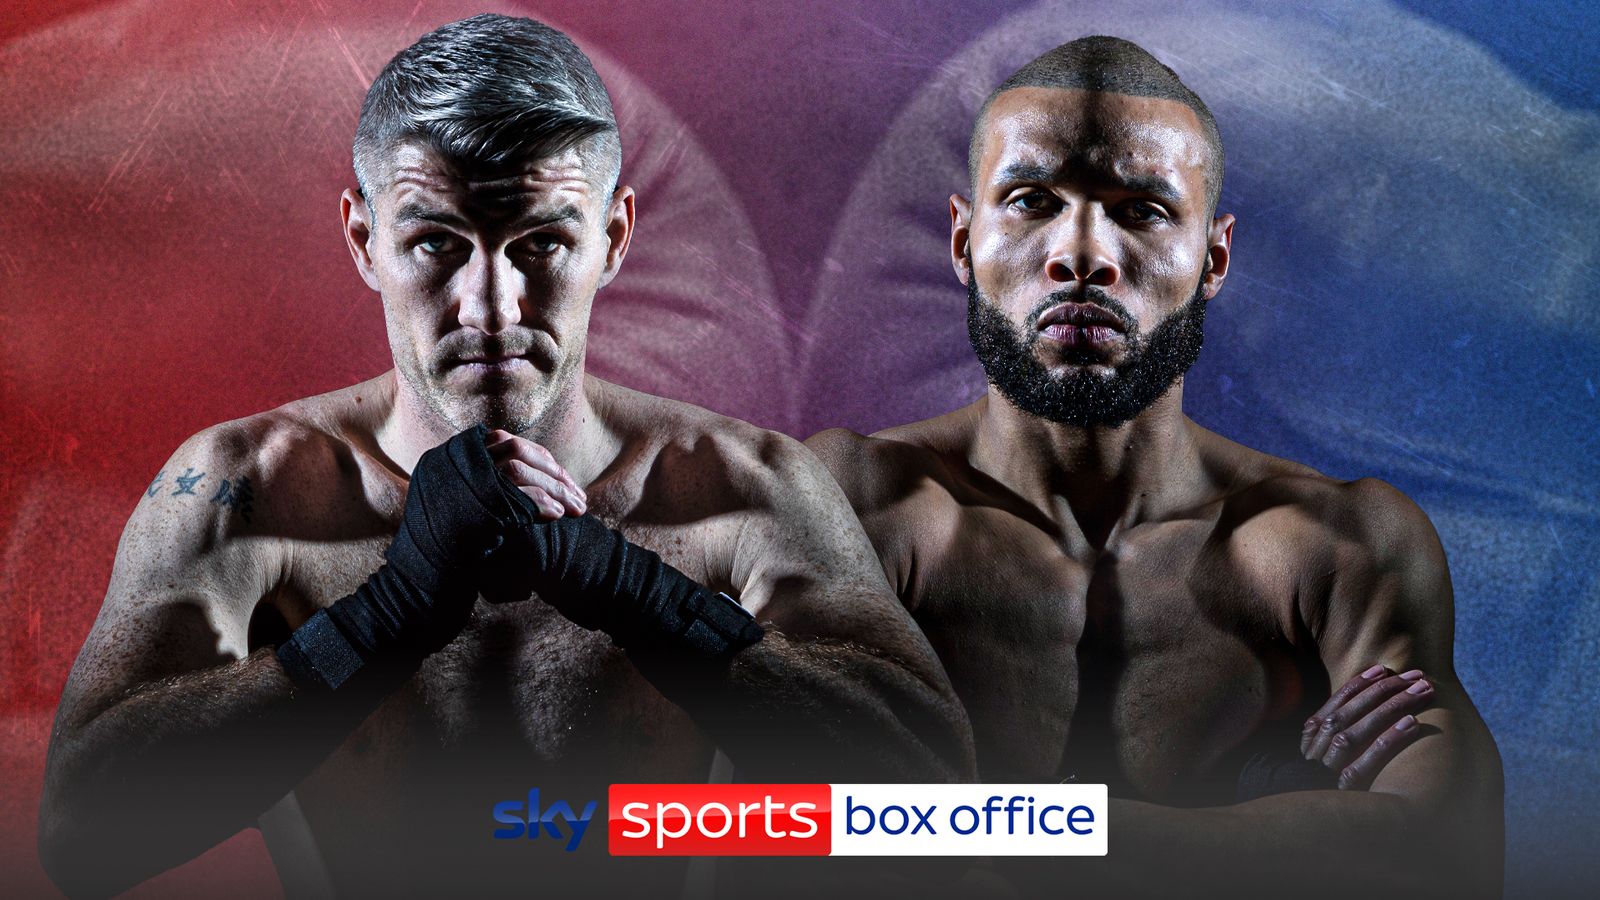 Liam Smith Vs Chris Eubank Jr 2 Predictions From Boxing Experts Ahead Of Big Rematch In 2655